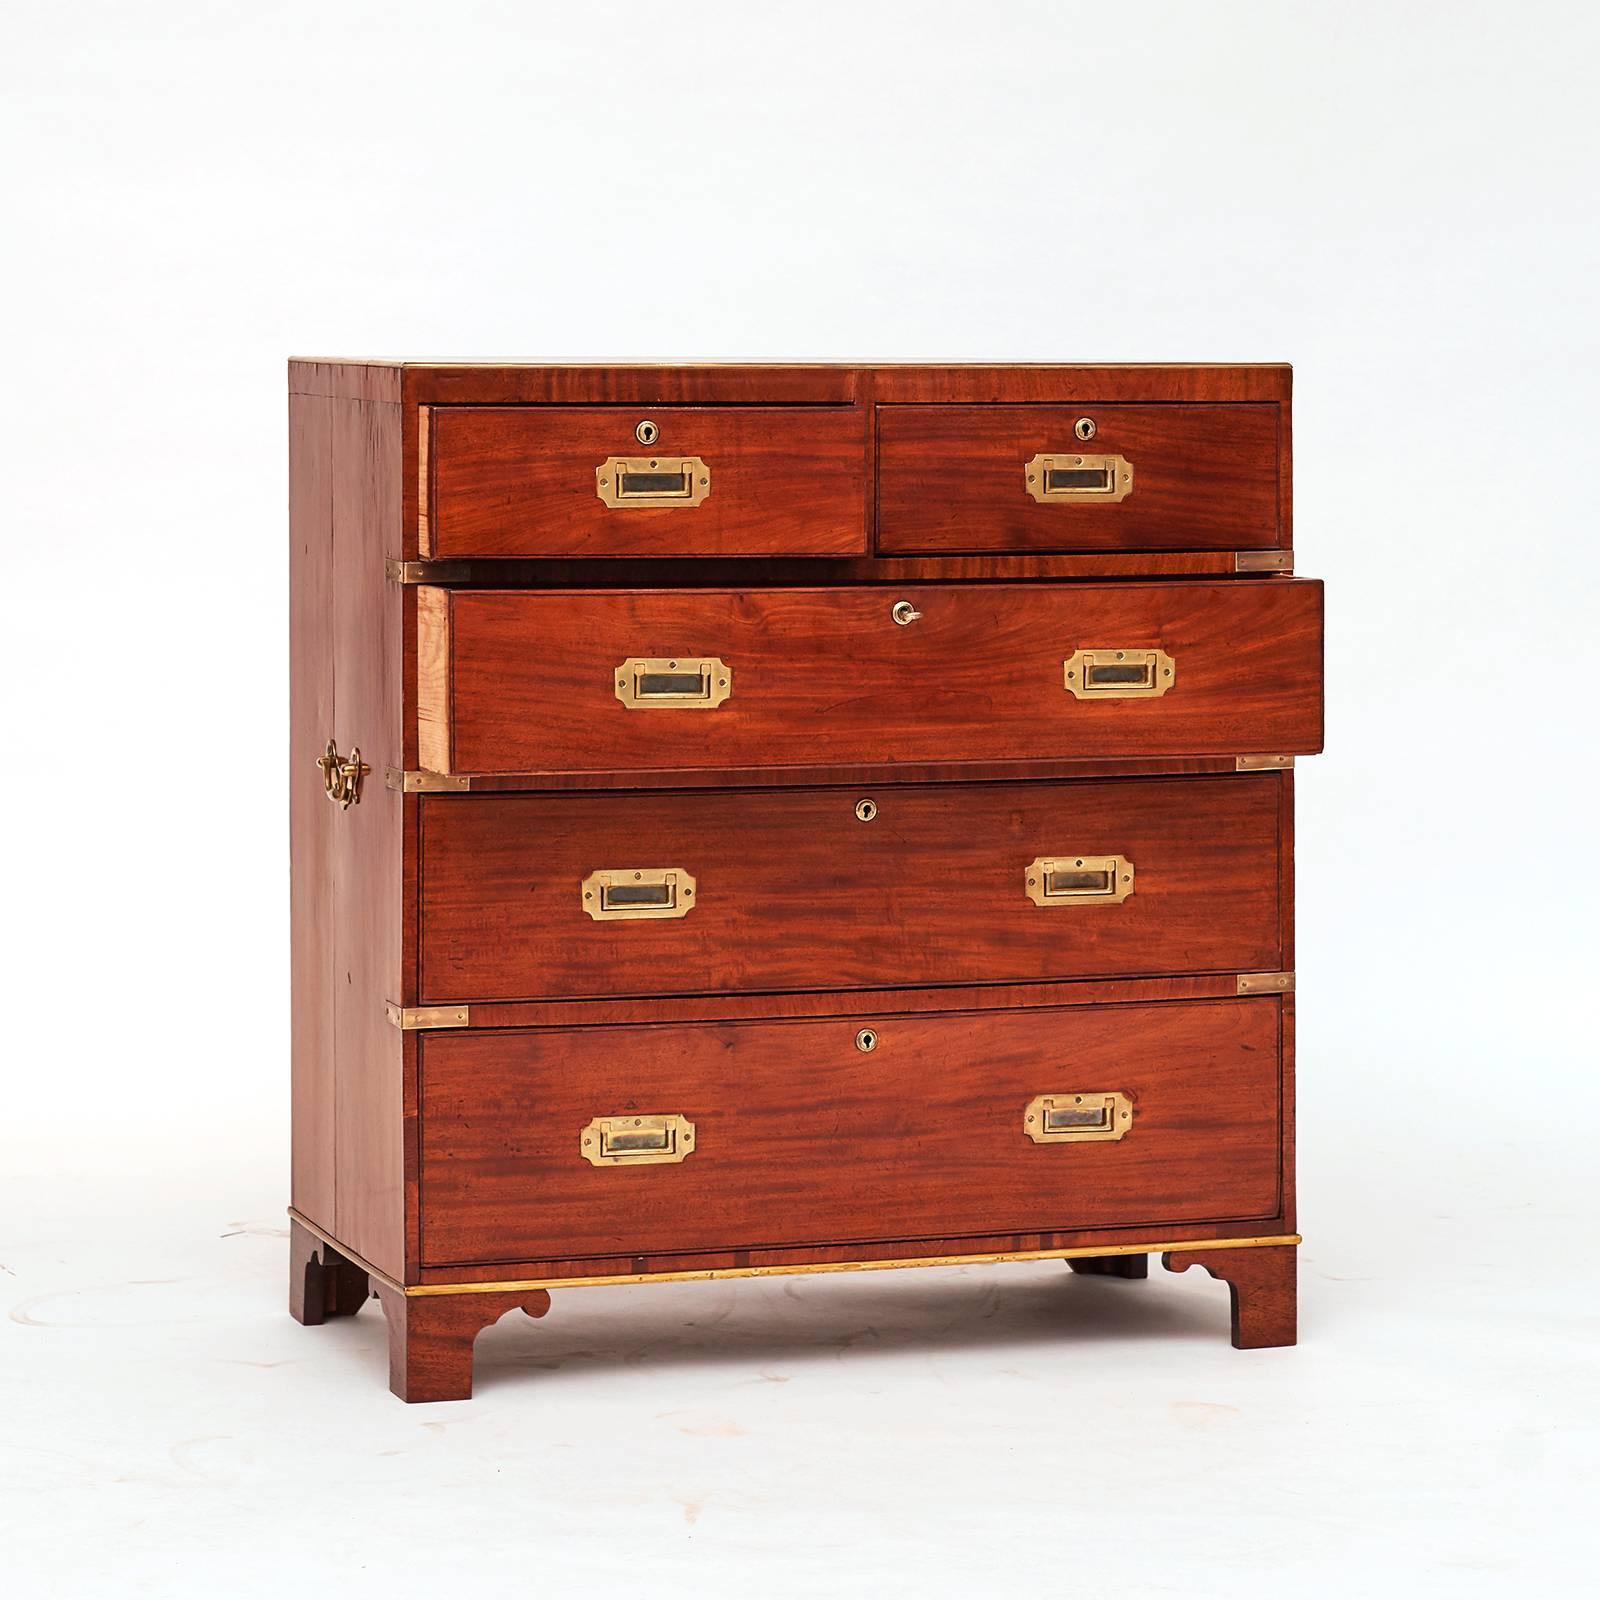 Campaigen chest, mahogany with original hardware and 
brass mouldrin, England, 1840-1860.
Gentle restored, with nice patina.